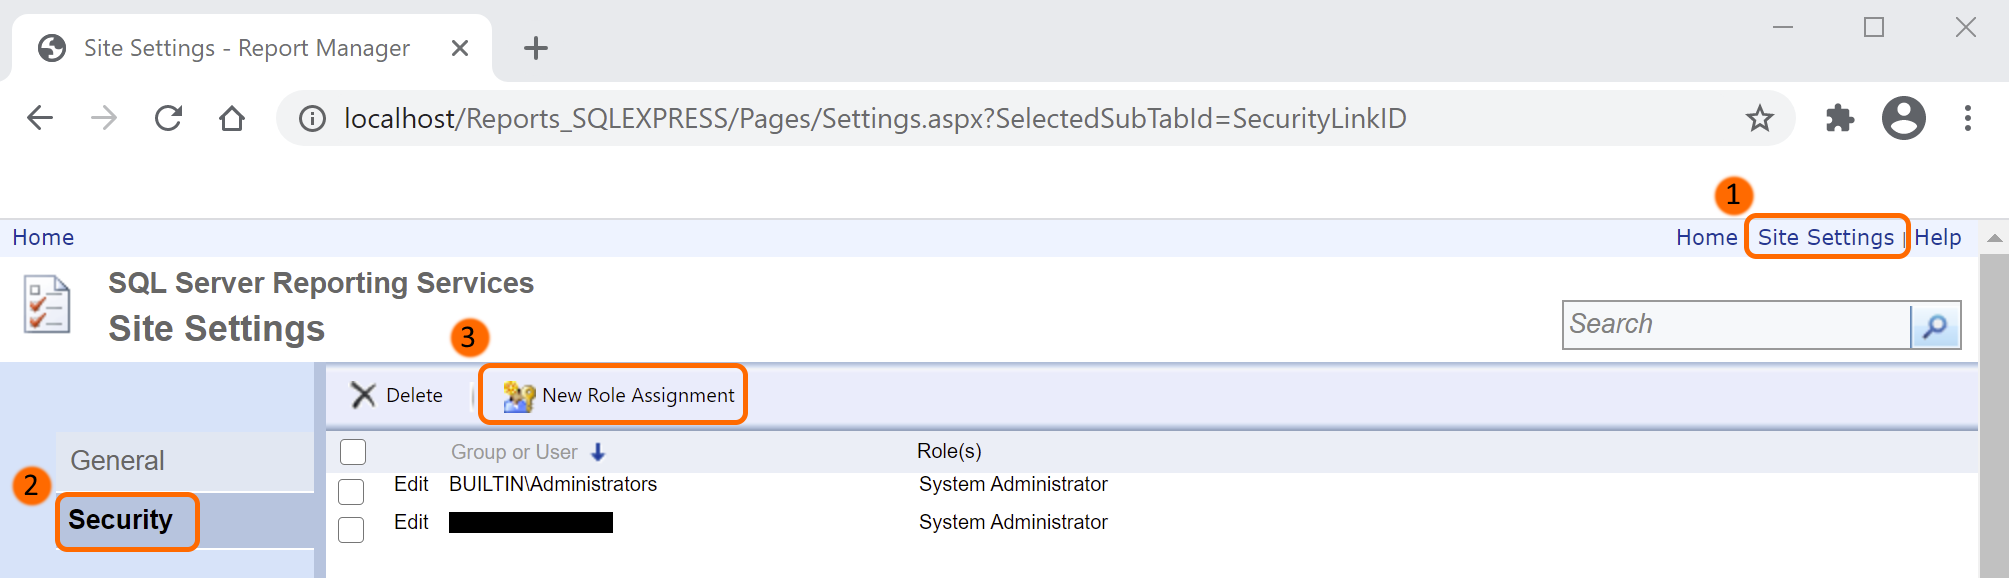 image of ssrs site settings